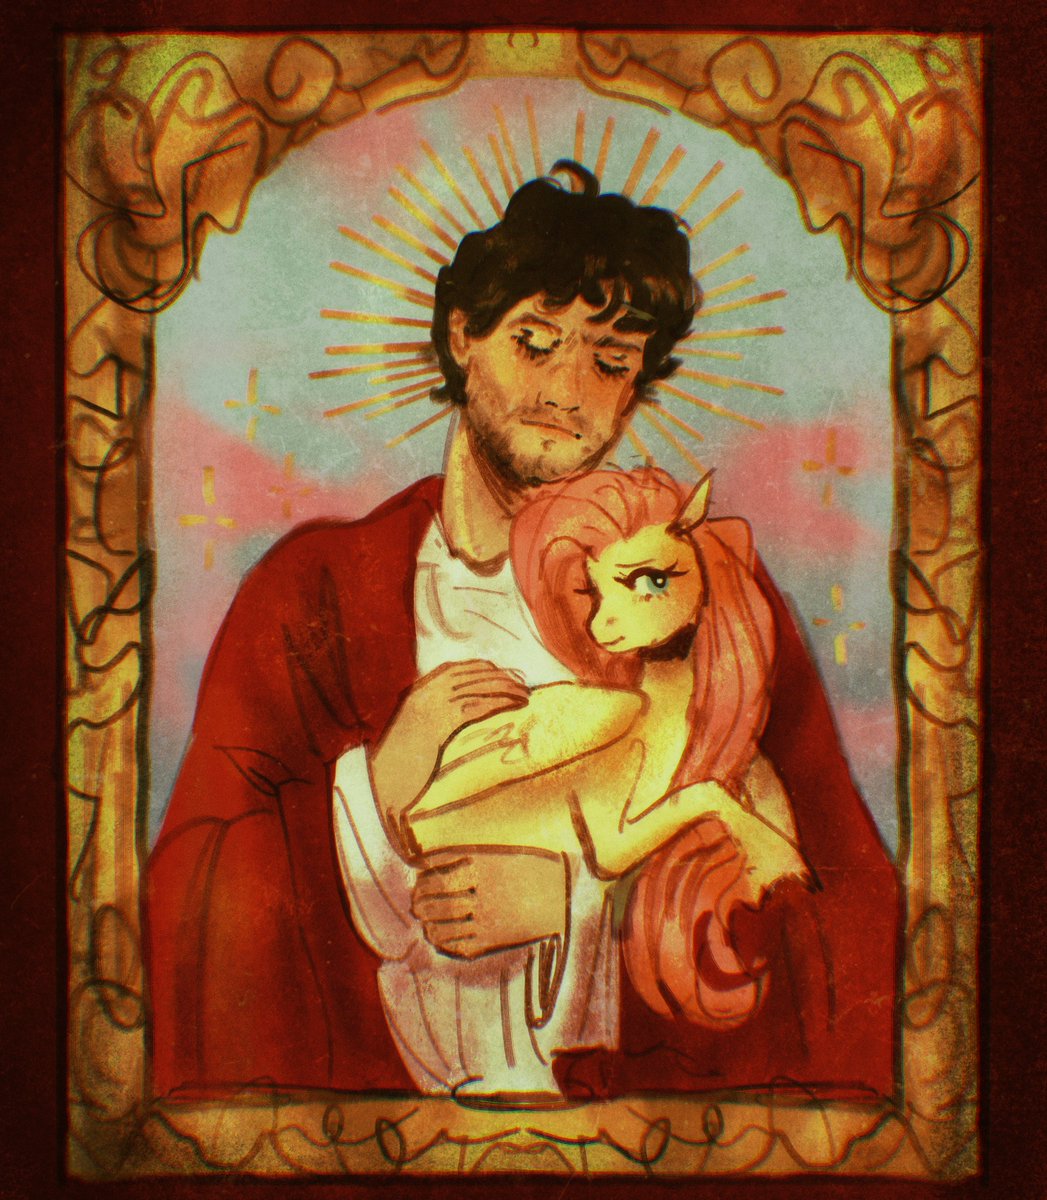 Will Graham holding Fluttershy like Jesus holding a lamb